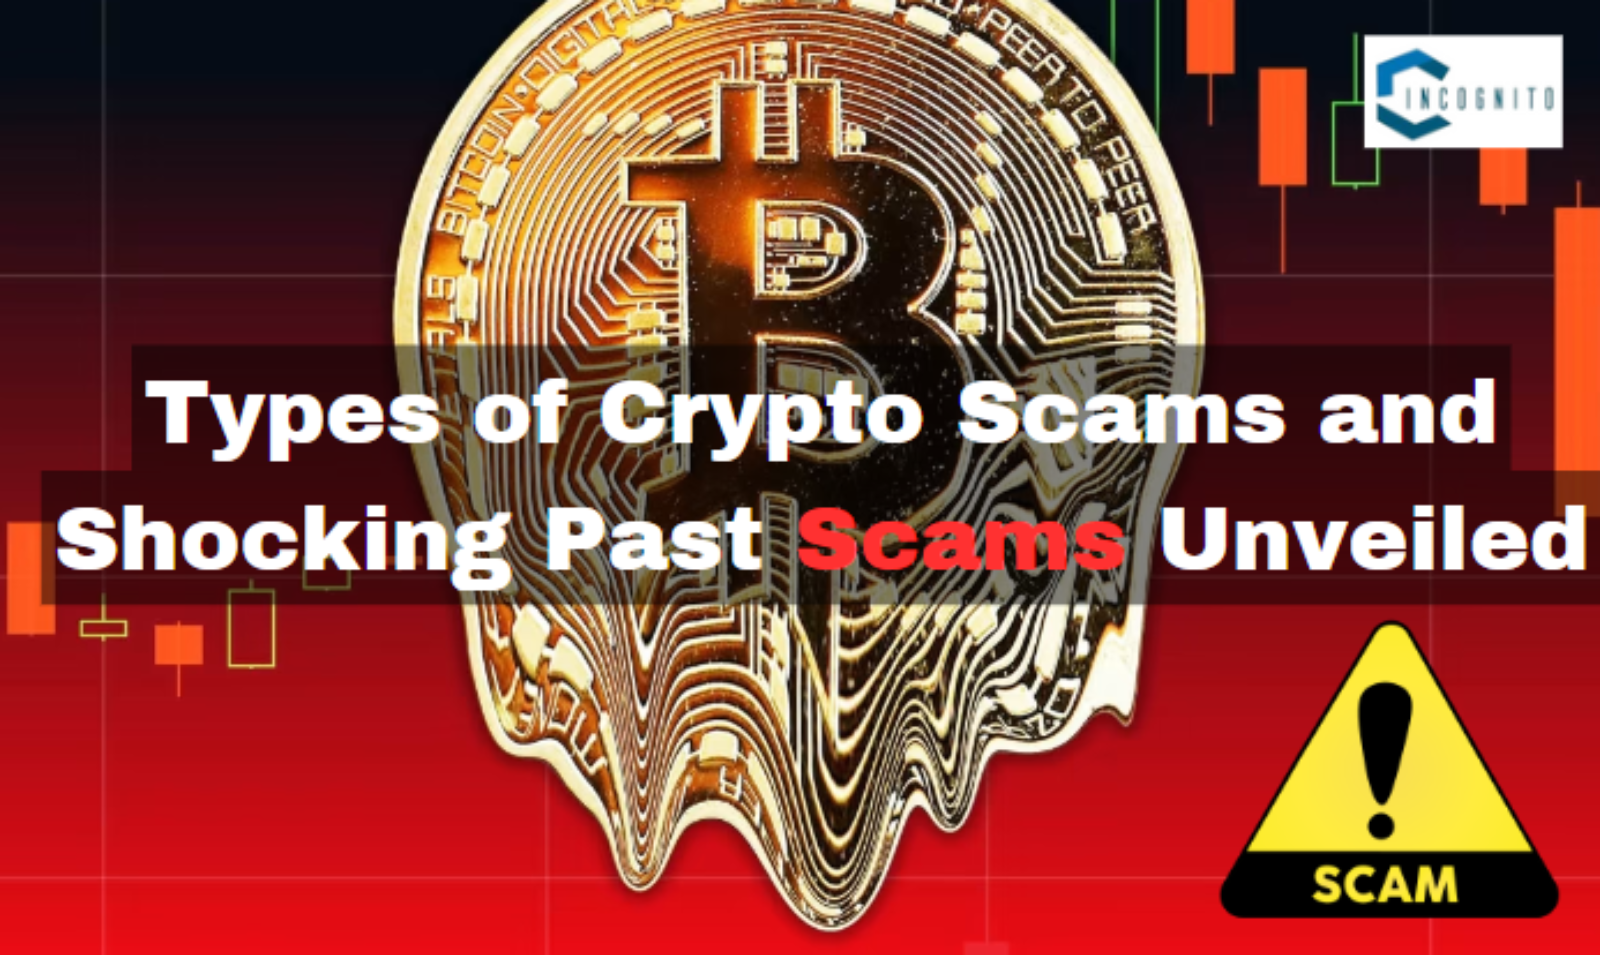 Types of Crypto Scams and Shocking Past Scams Unveiled